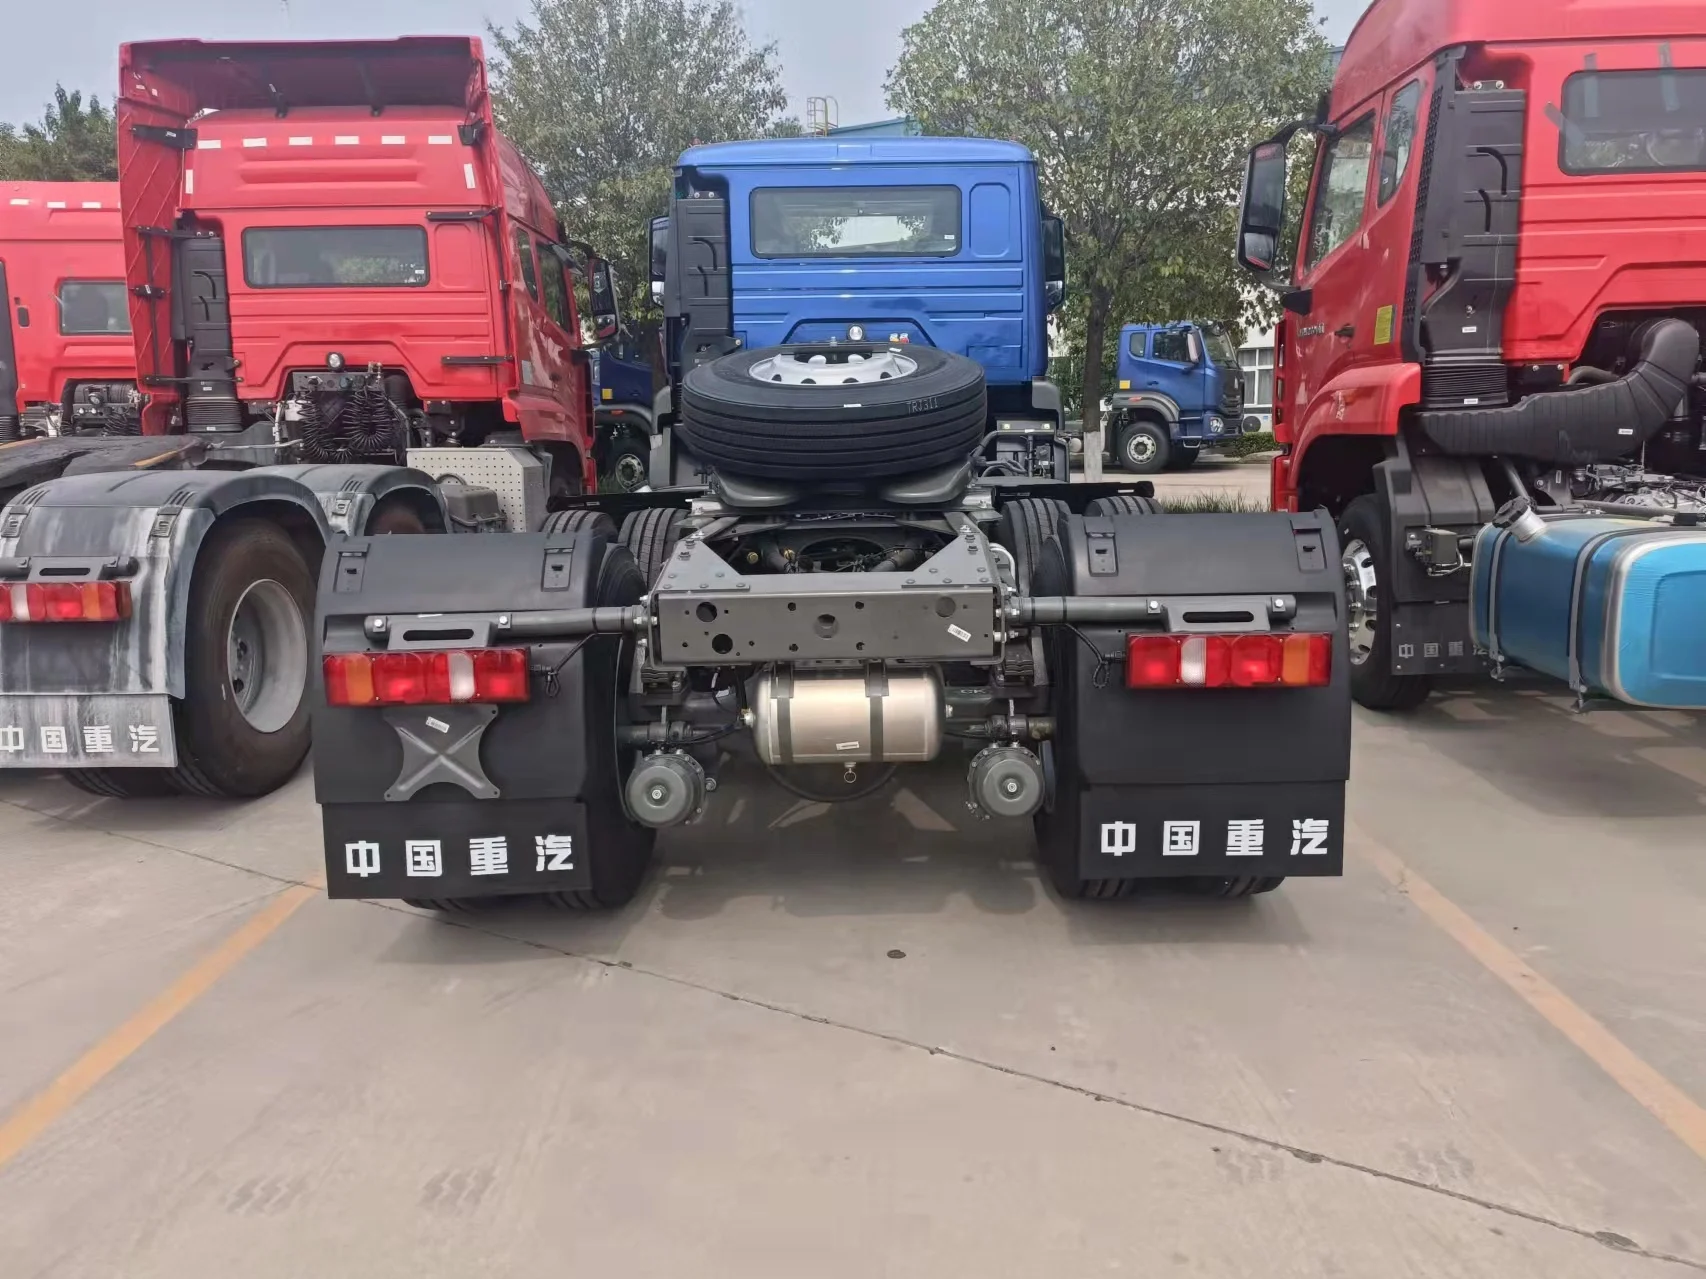 Siotruk H78L High roof 400HP HOWO HOHAN E7G 6X4 10 Wheels Euro 2 Emission TRACTOR TRUCK